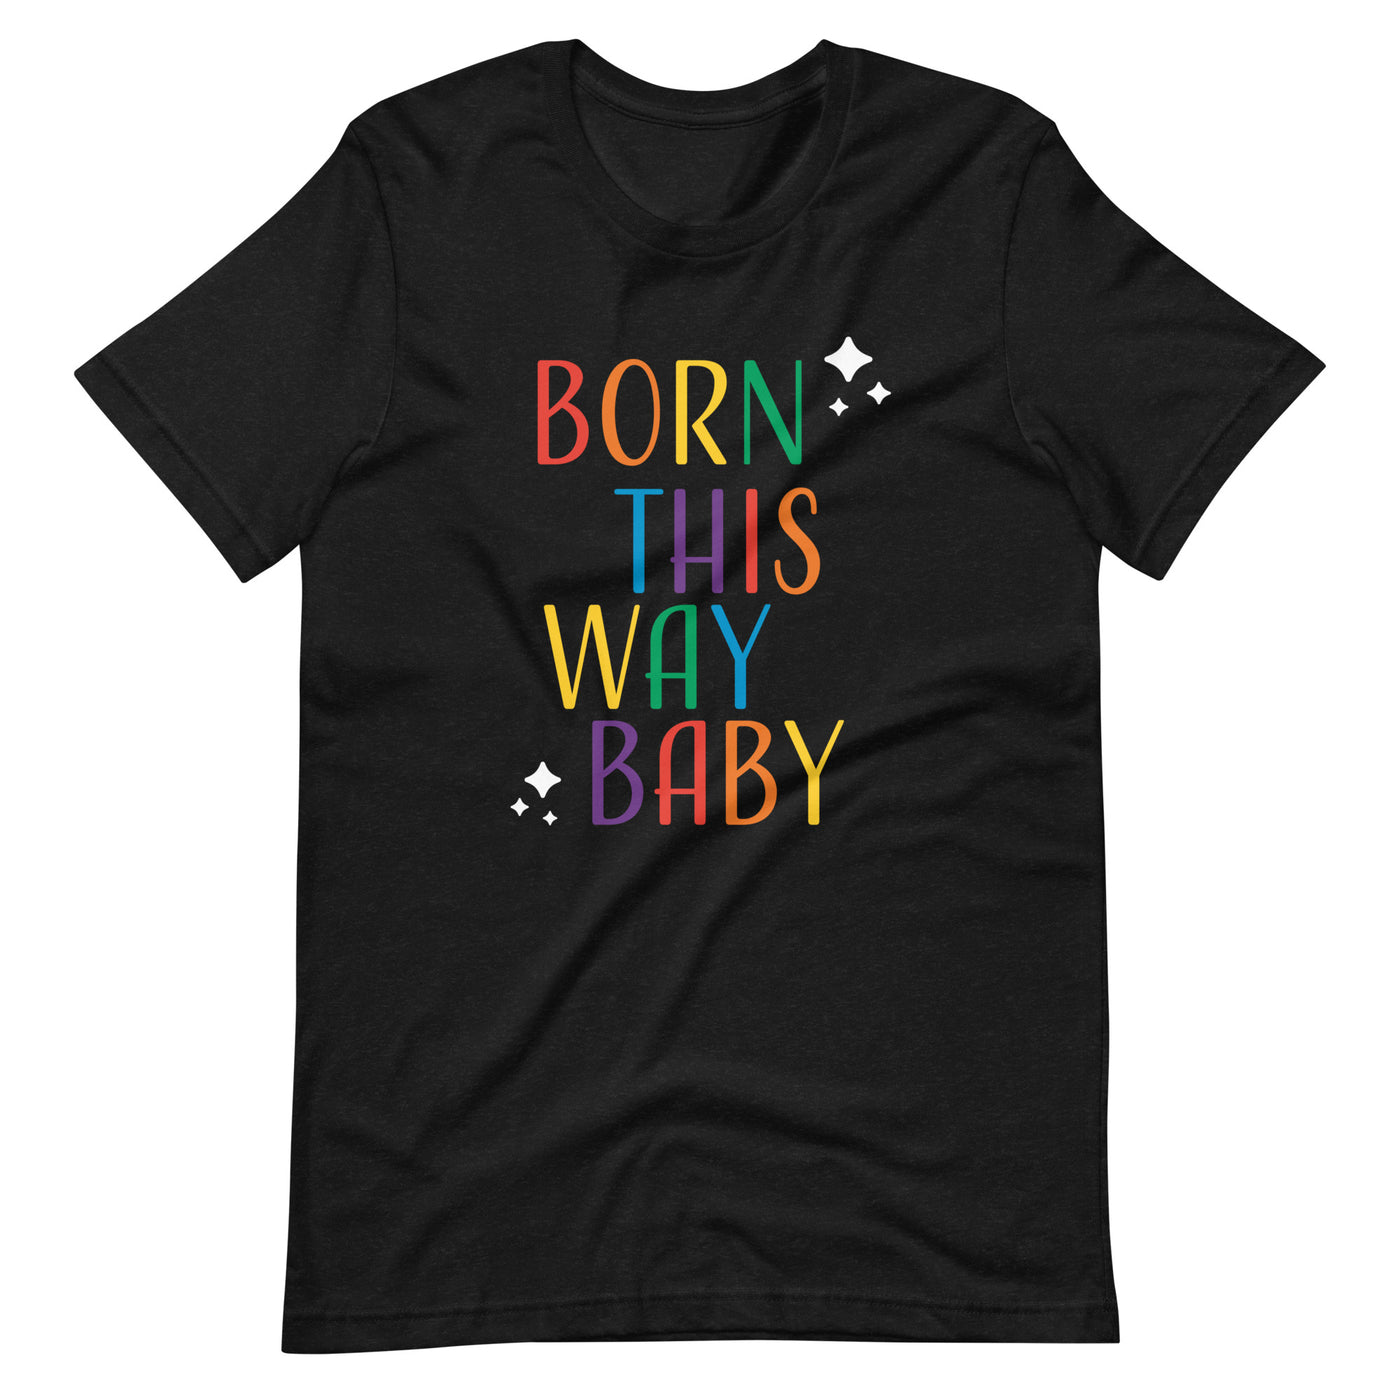 You Were Born a Superstar Born This Way, Baby T-Shirt